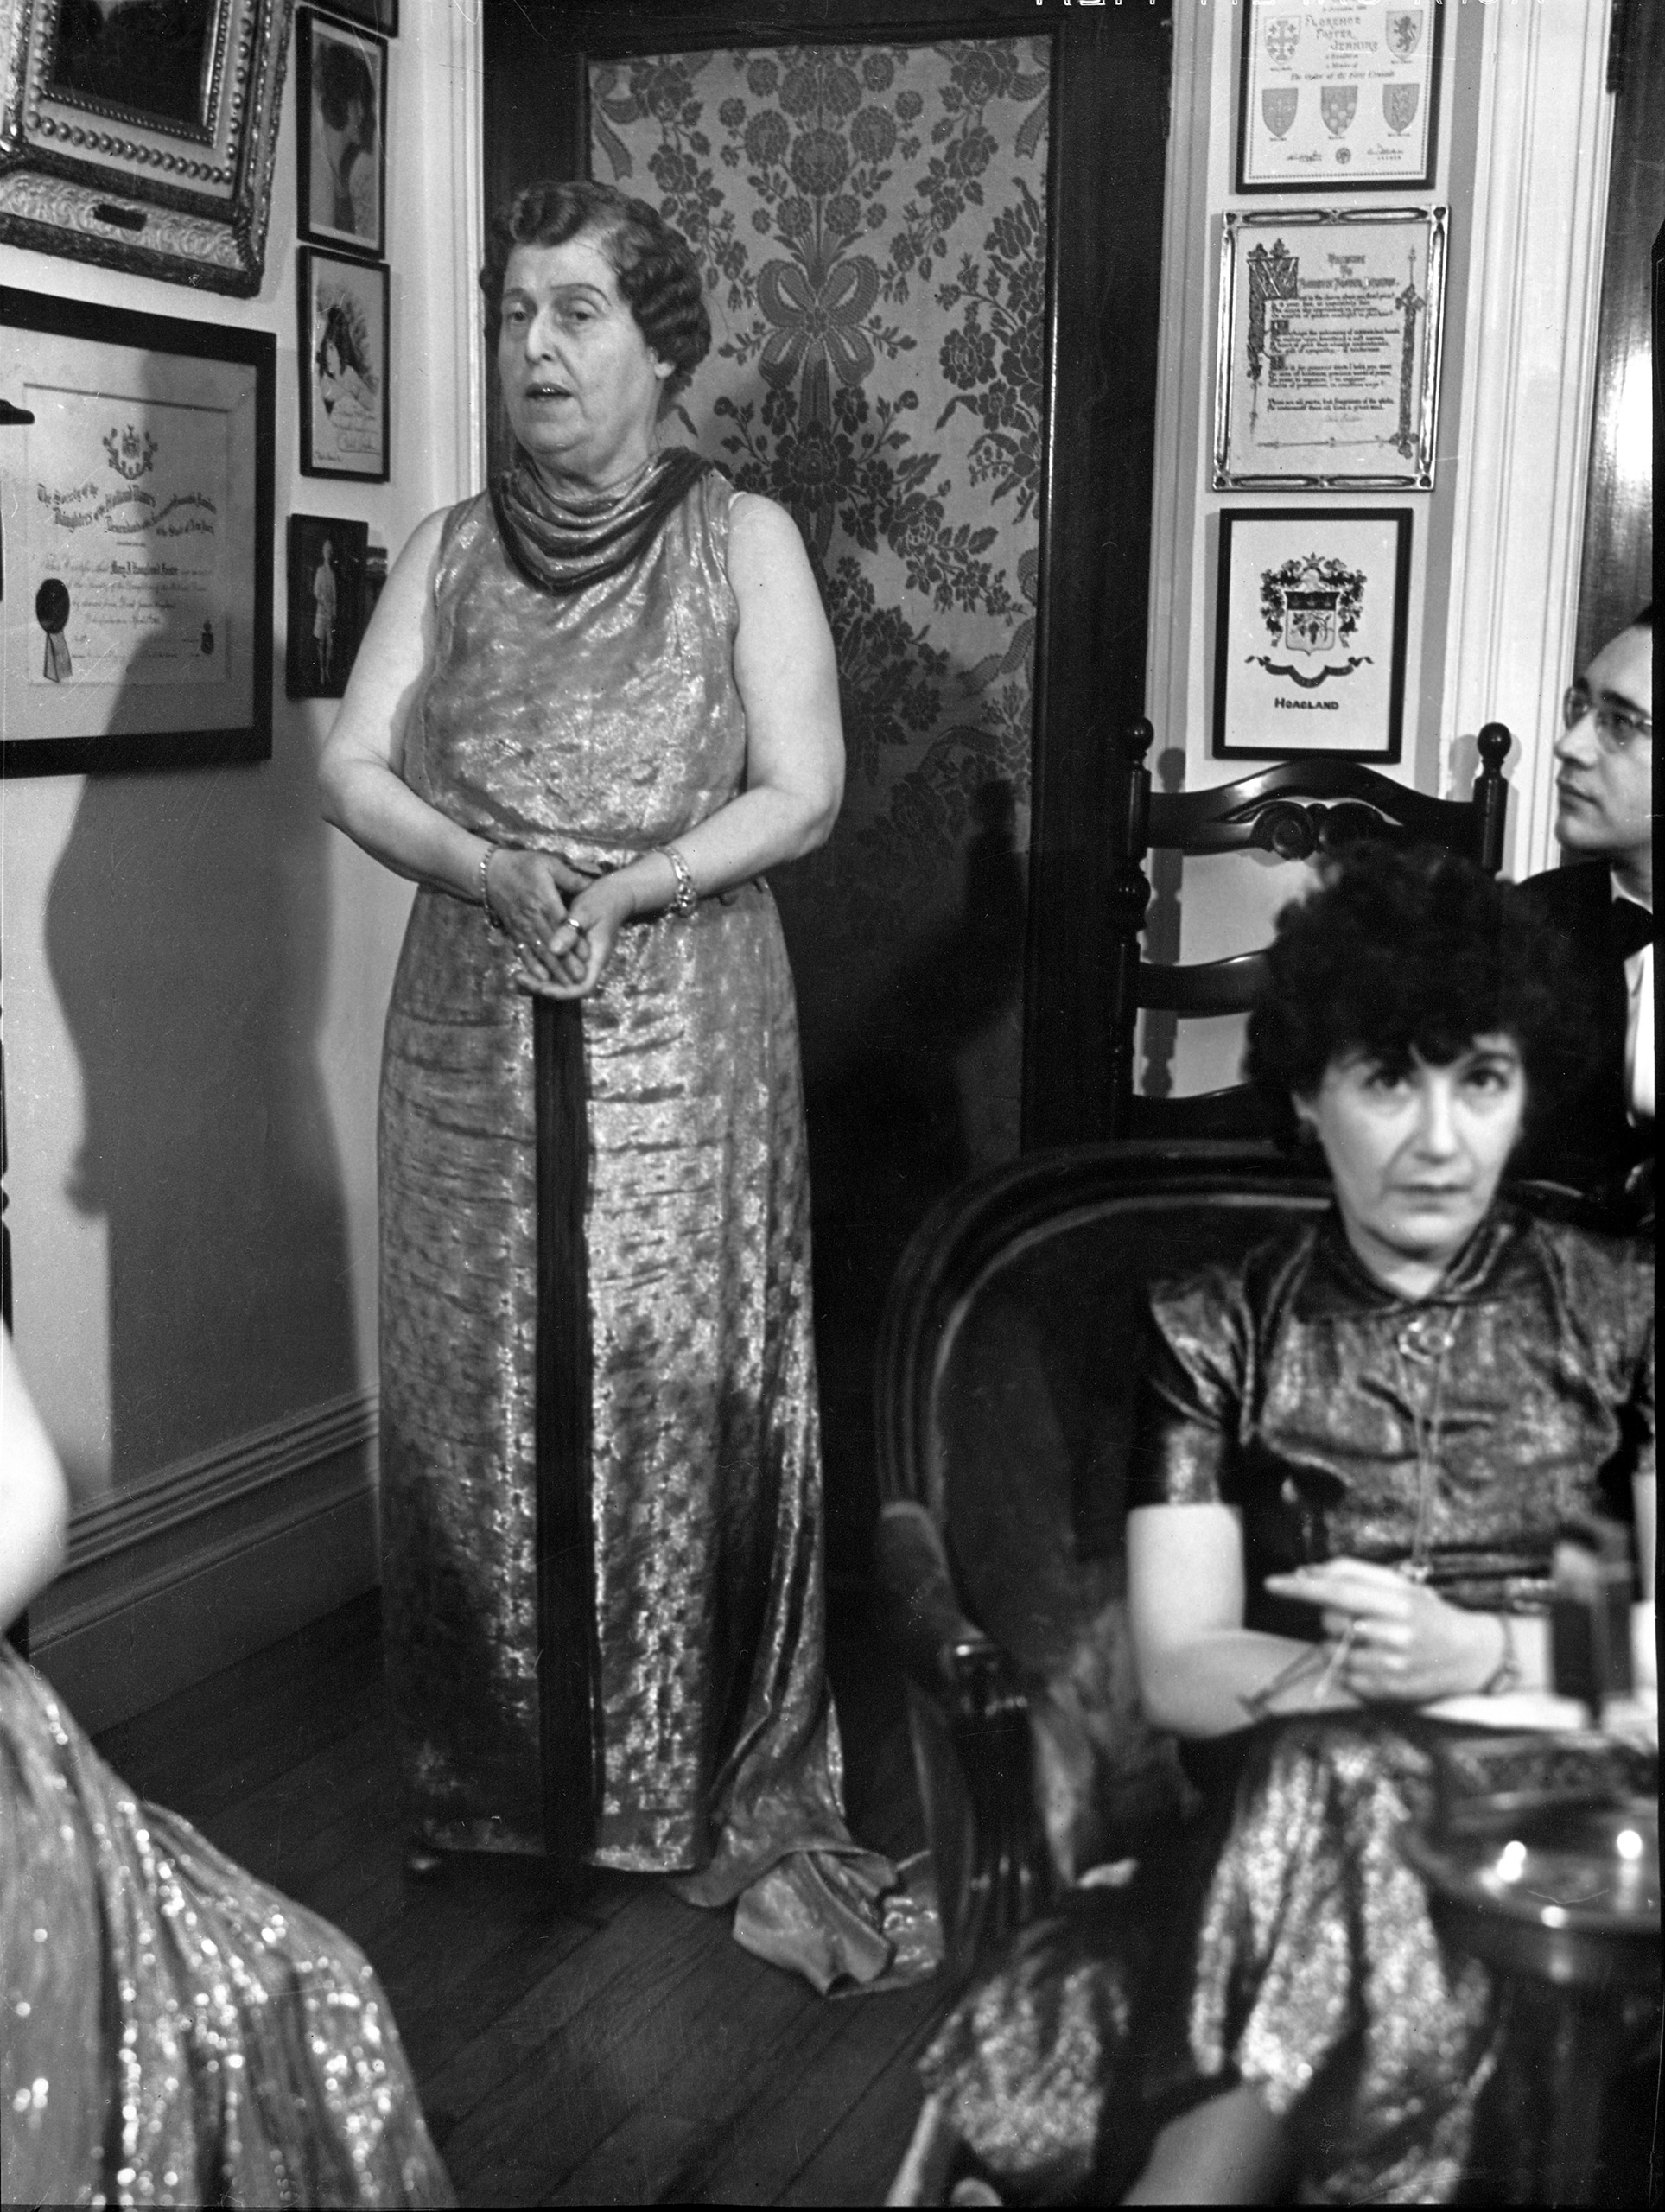 Florence Foster Jenkins entertaining guests in 1937.